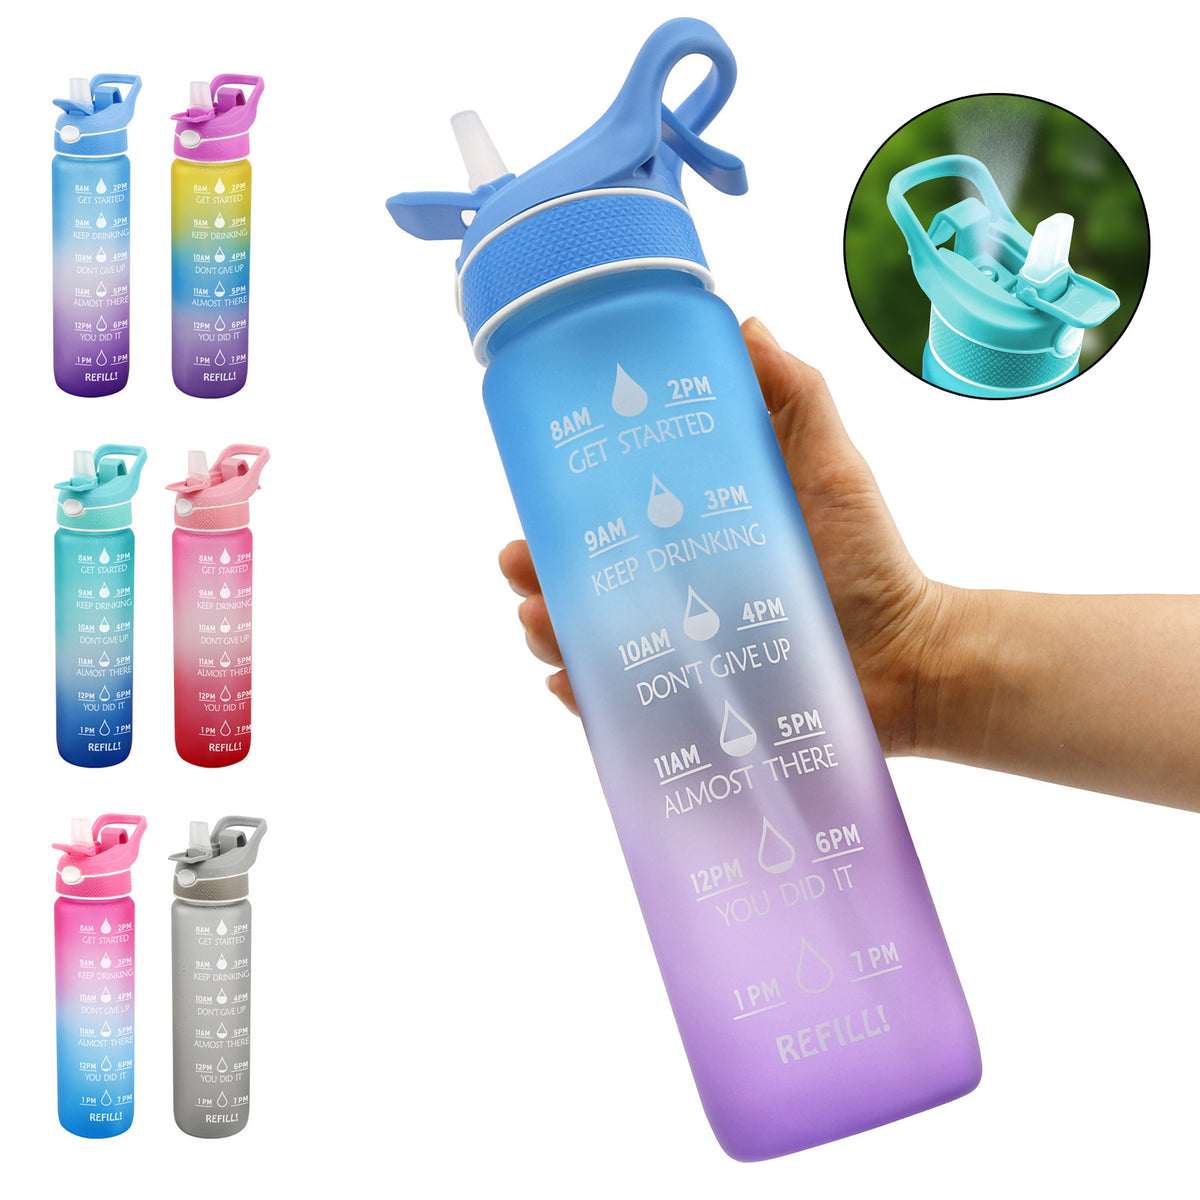 "1000ML Spray Water Bottle: Hydration on the Go!"